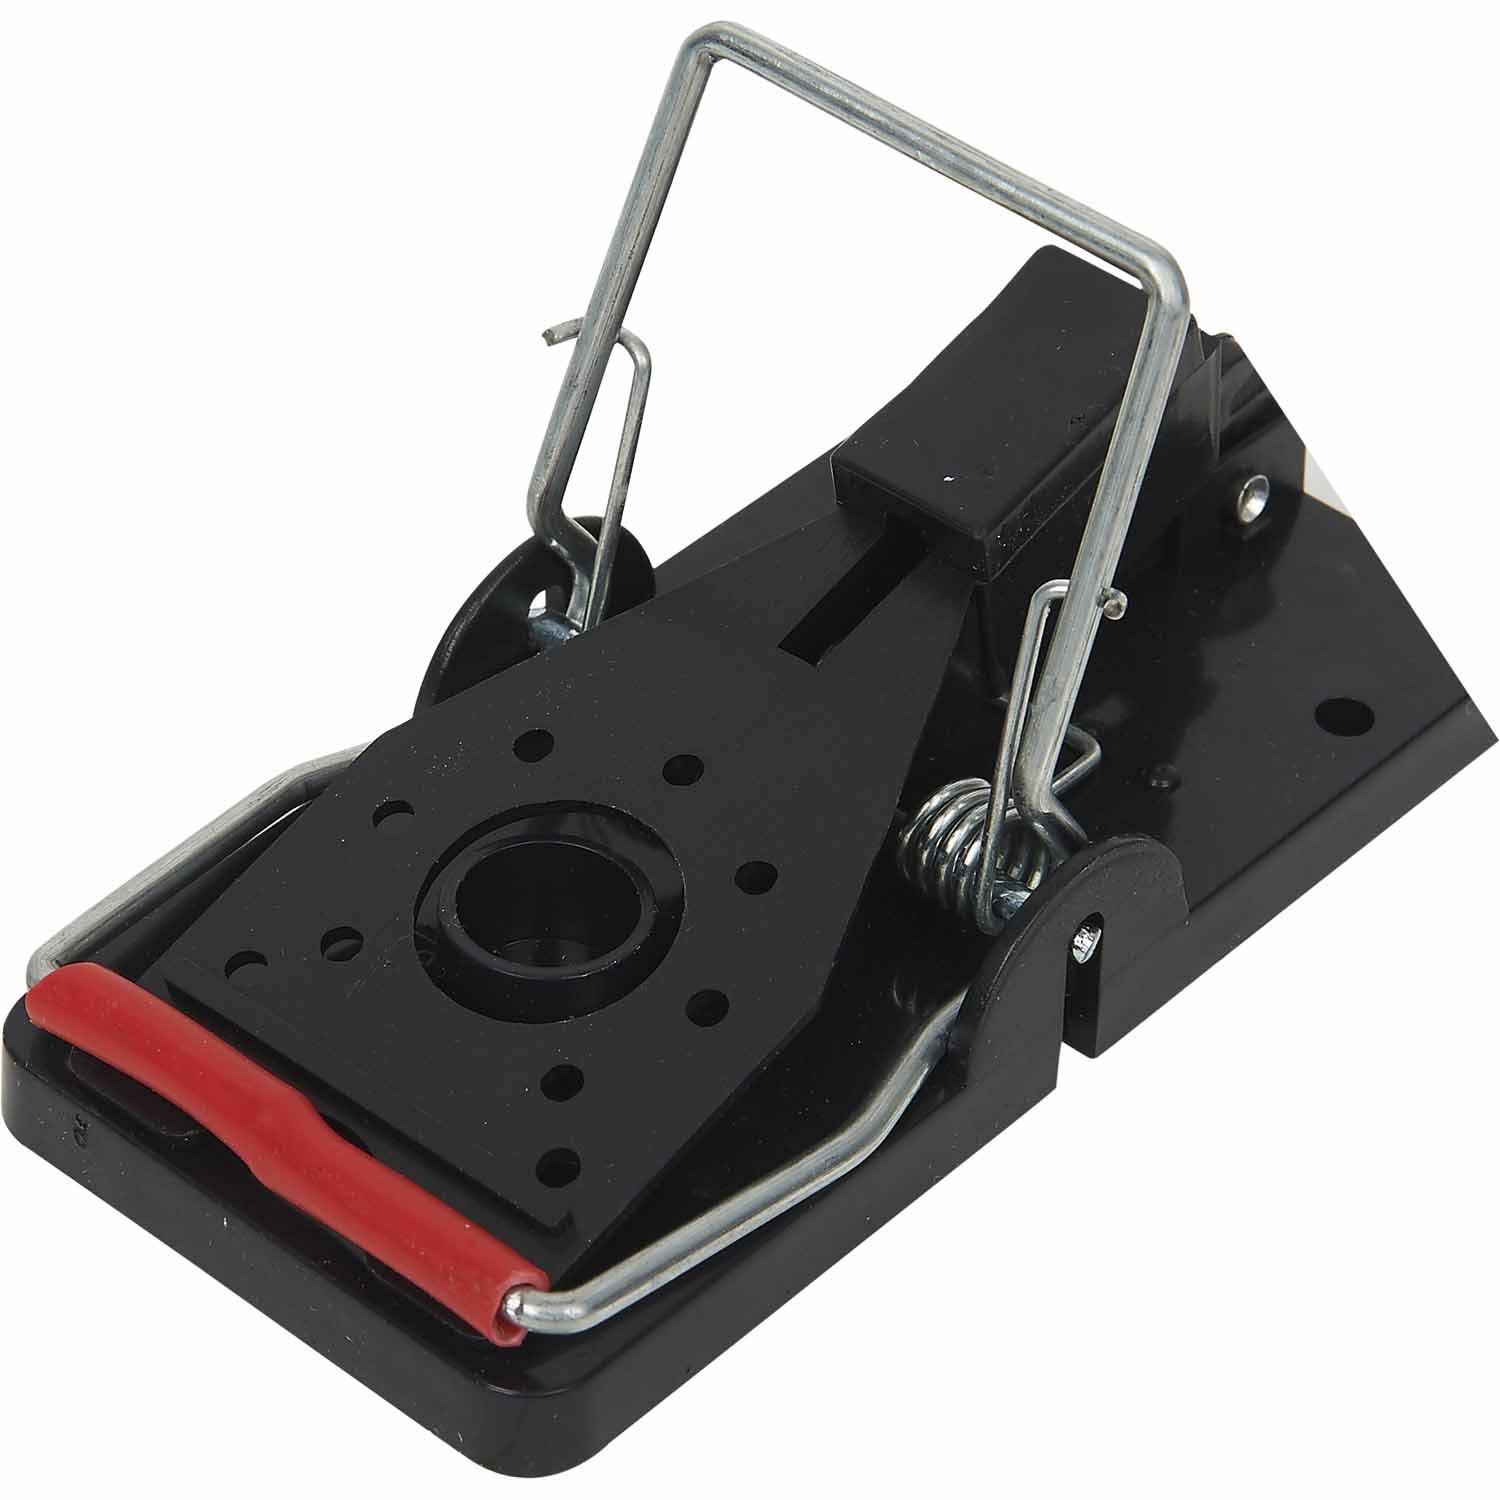 Times Up Plastic Mouse Trap Hammer Hardware